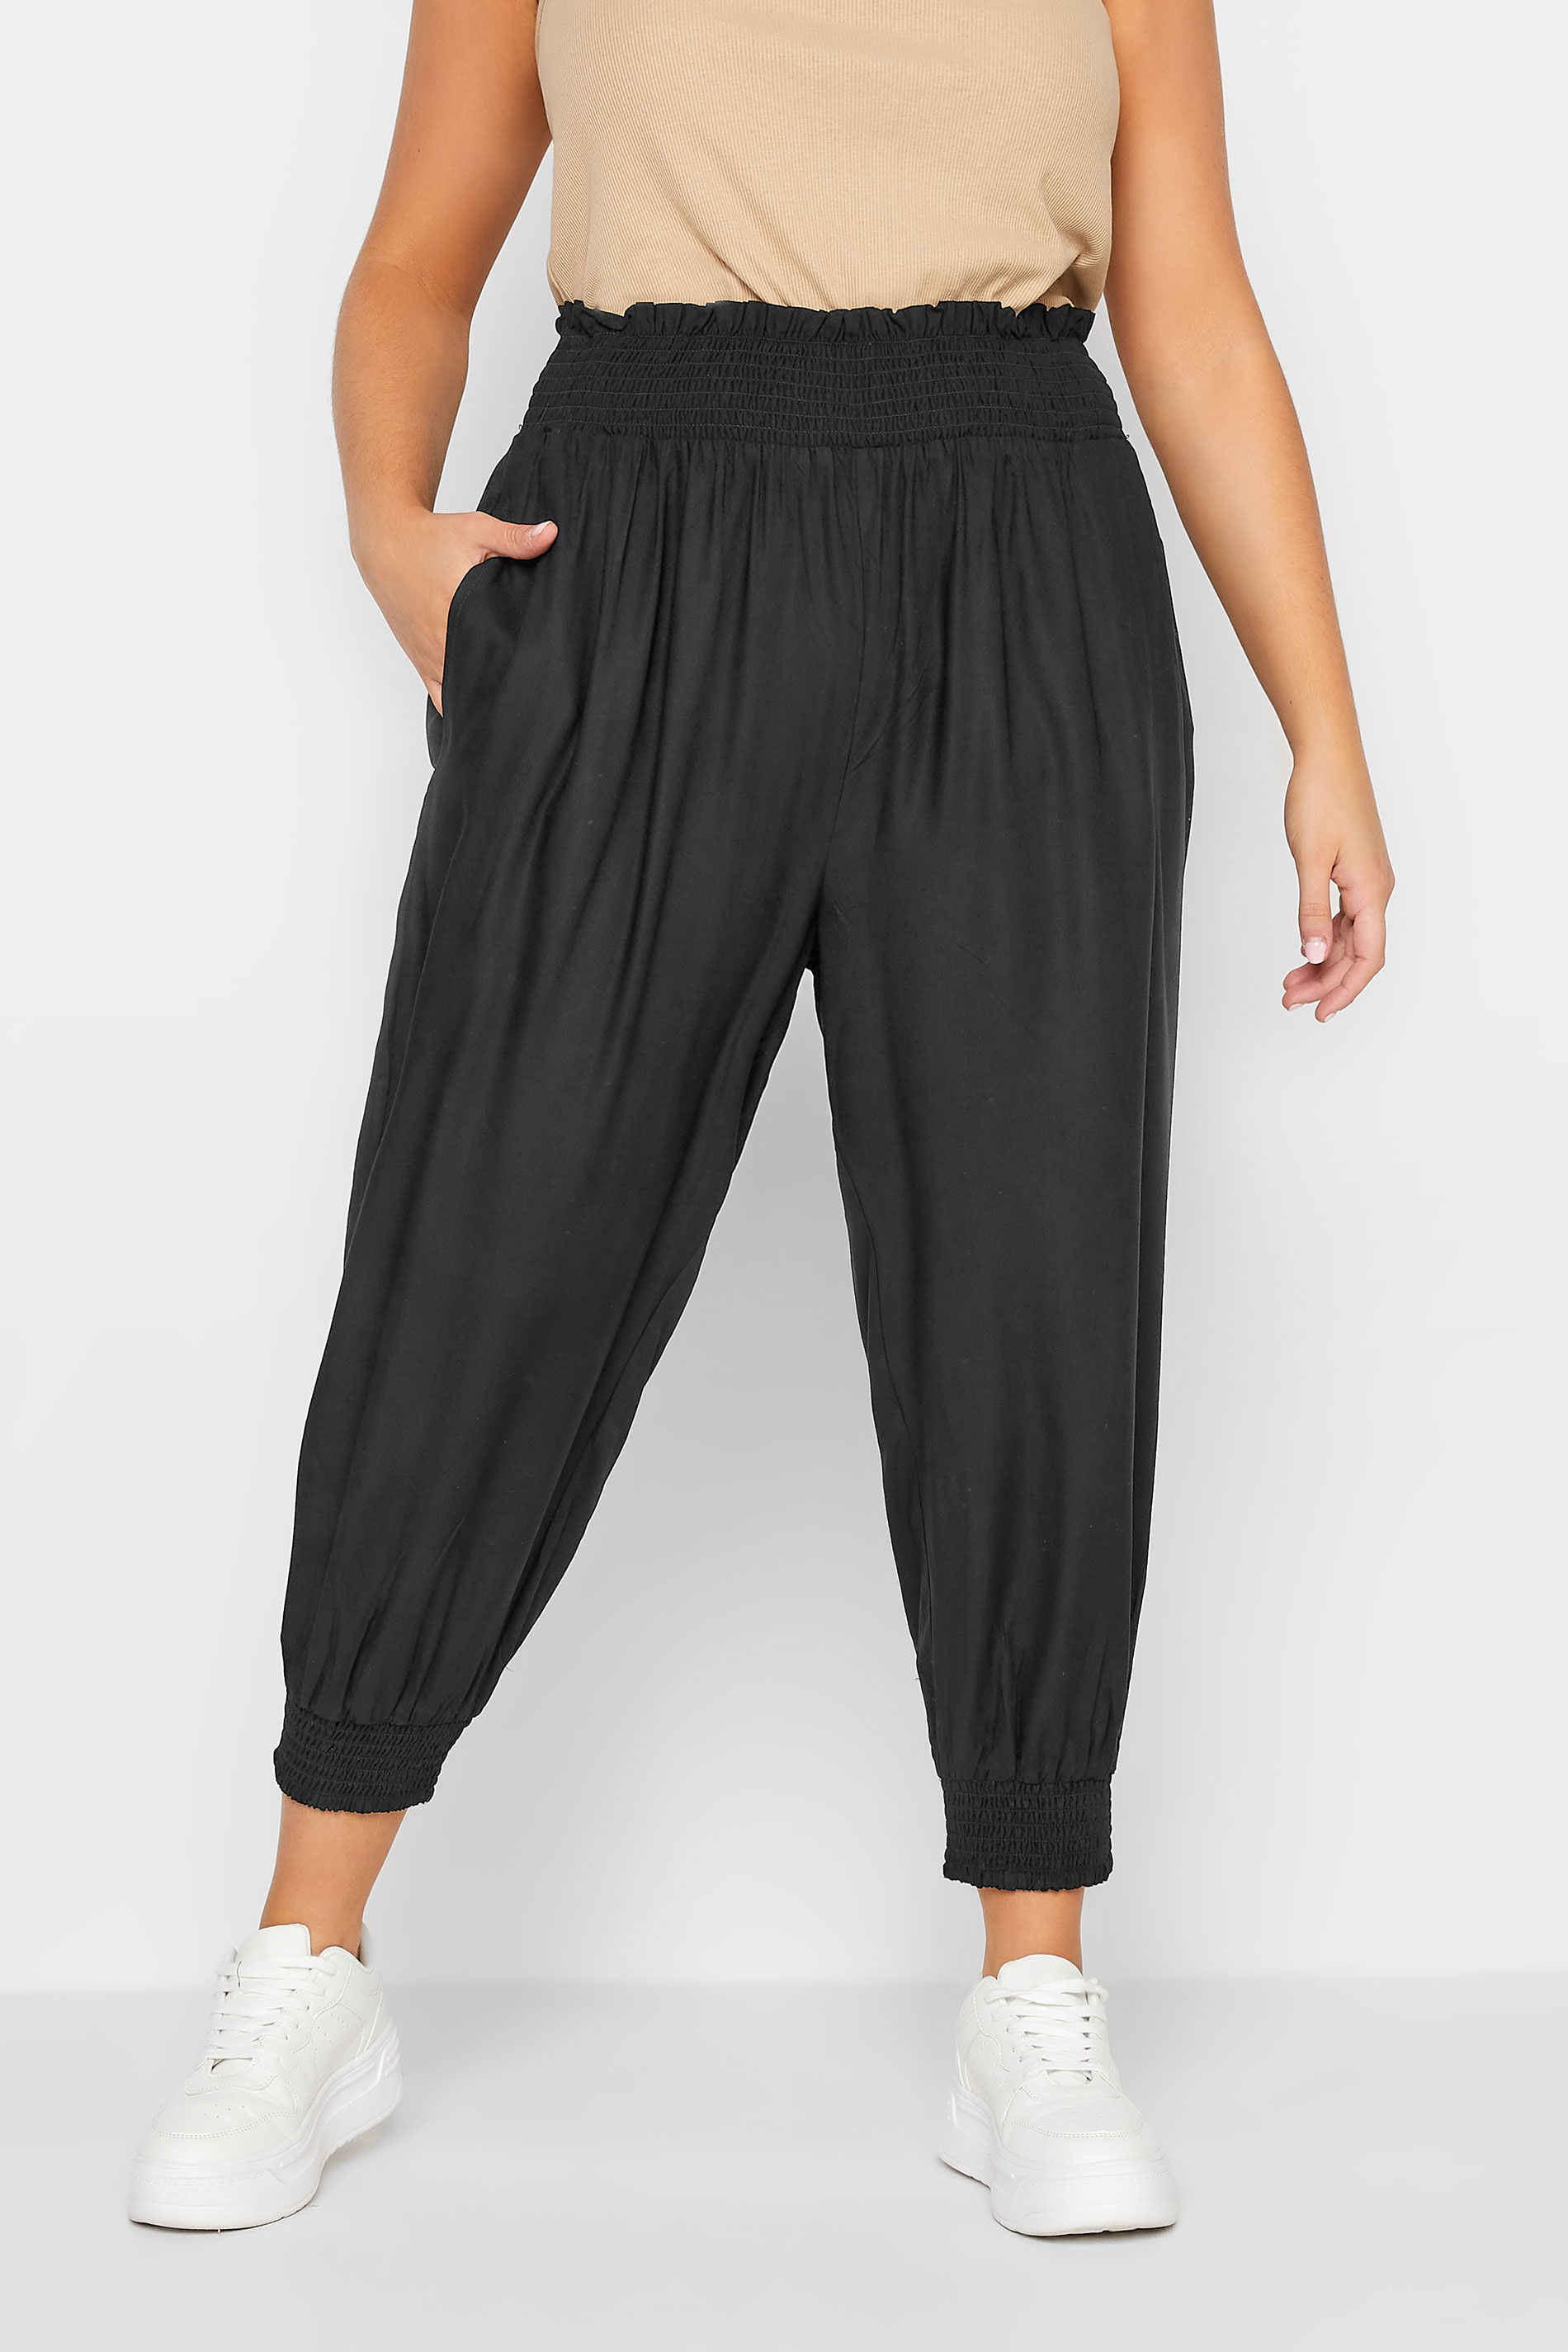 YOURS Curve Black Shirred Waist Cropped Harem Trousers | Yours Clothing 1